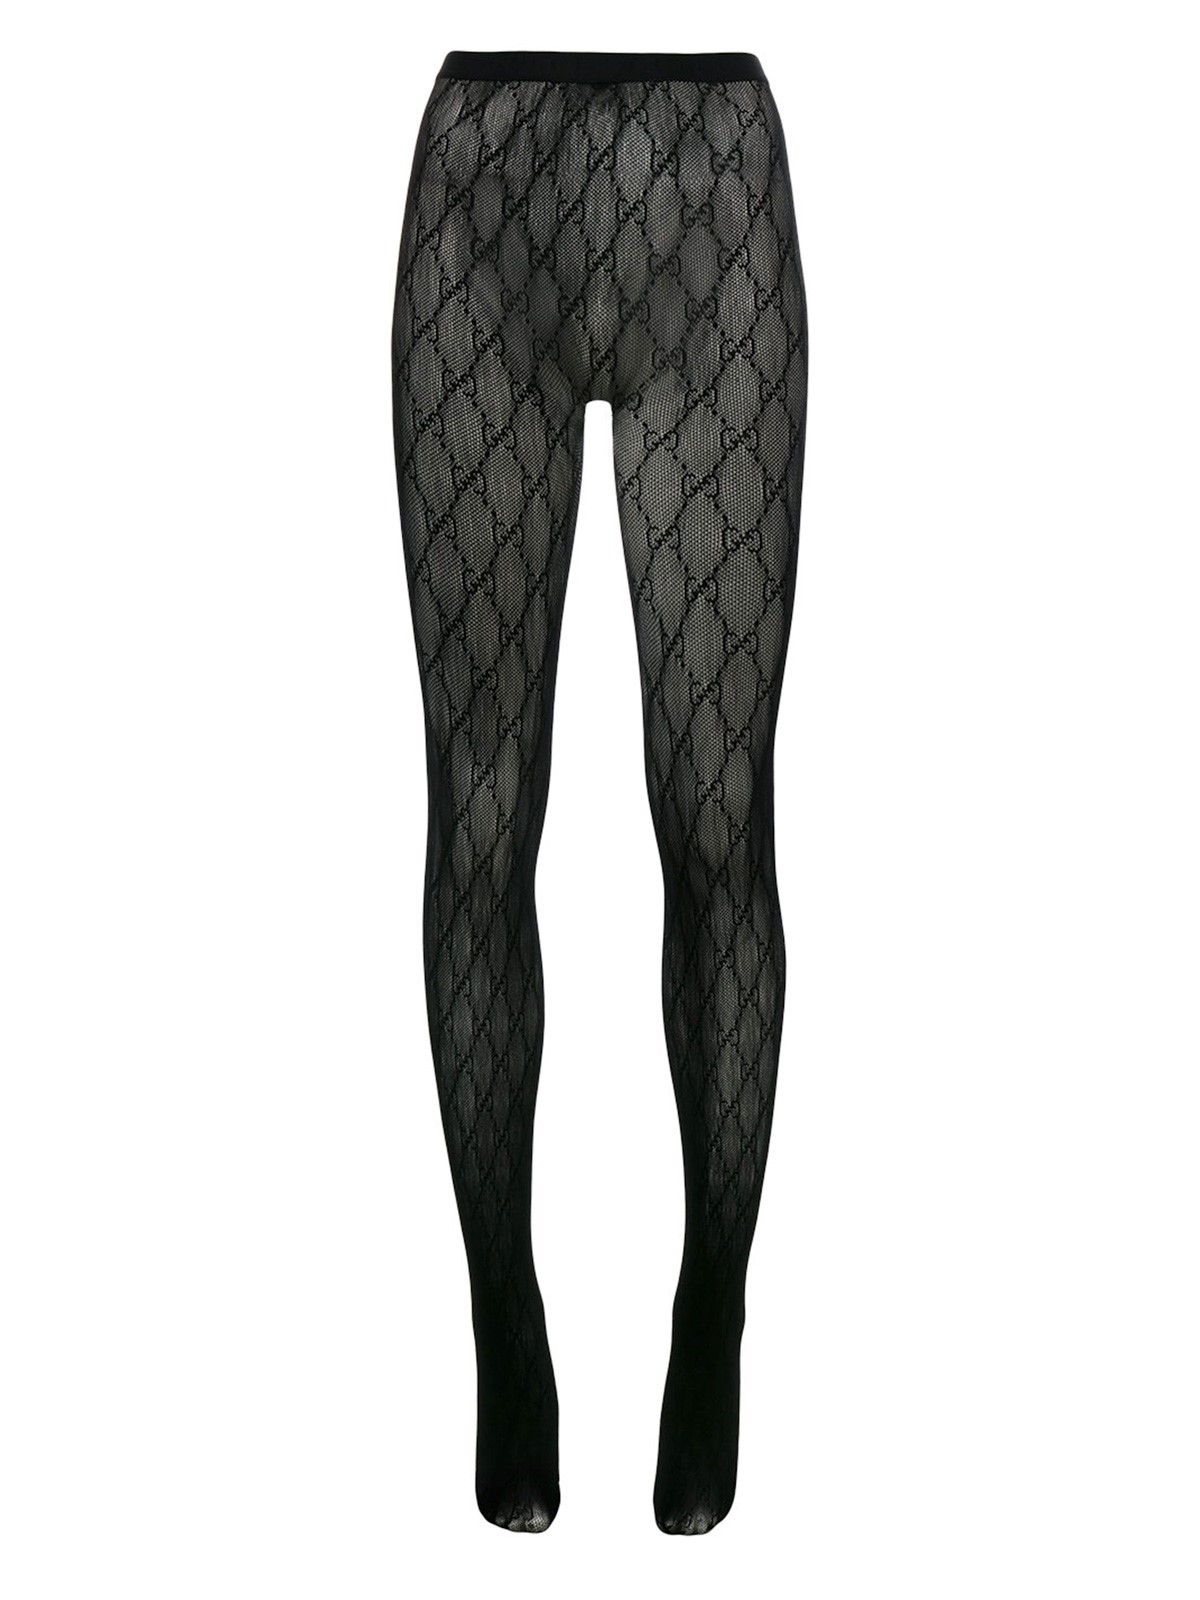 gucci GG LOGO TIGHTS available on montiboutique.com - 21667